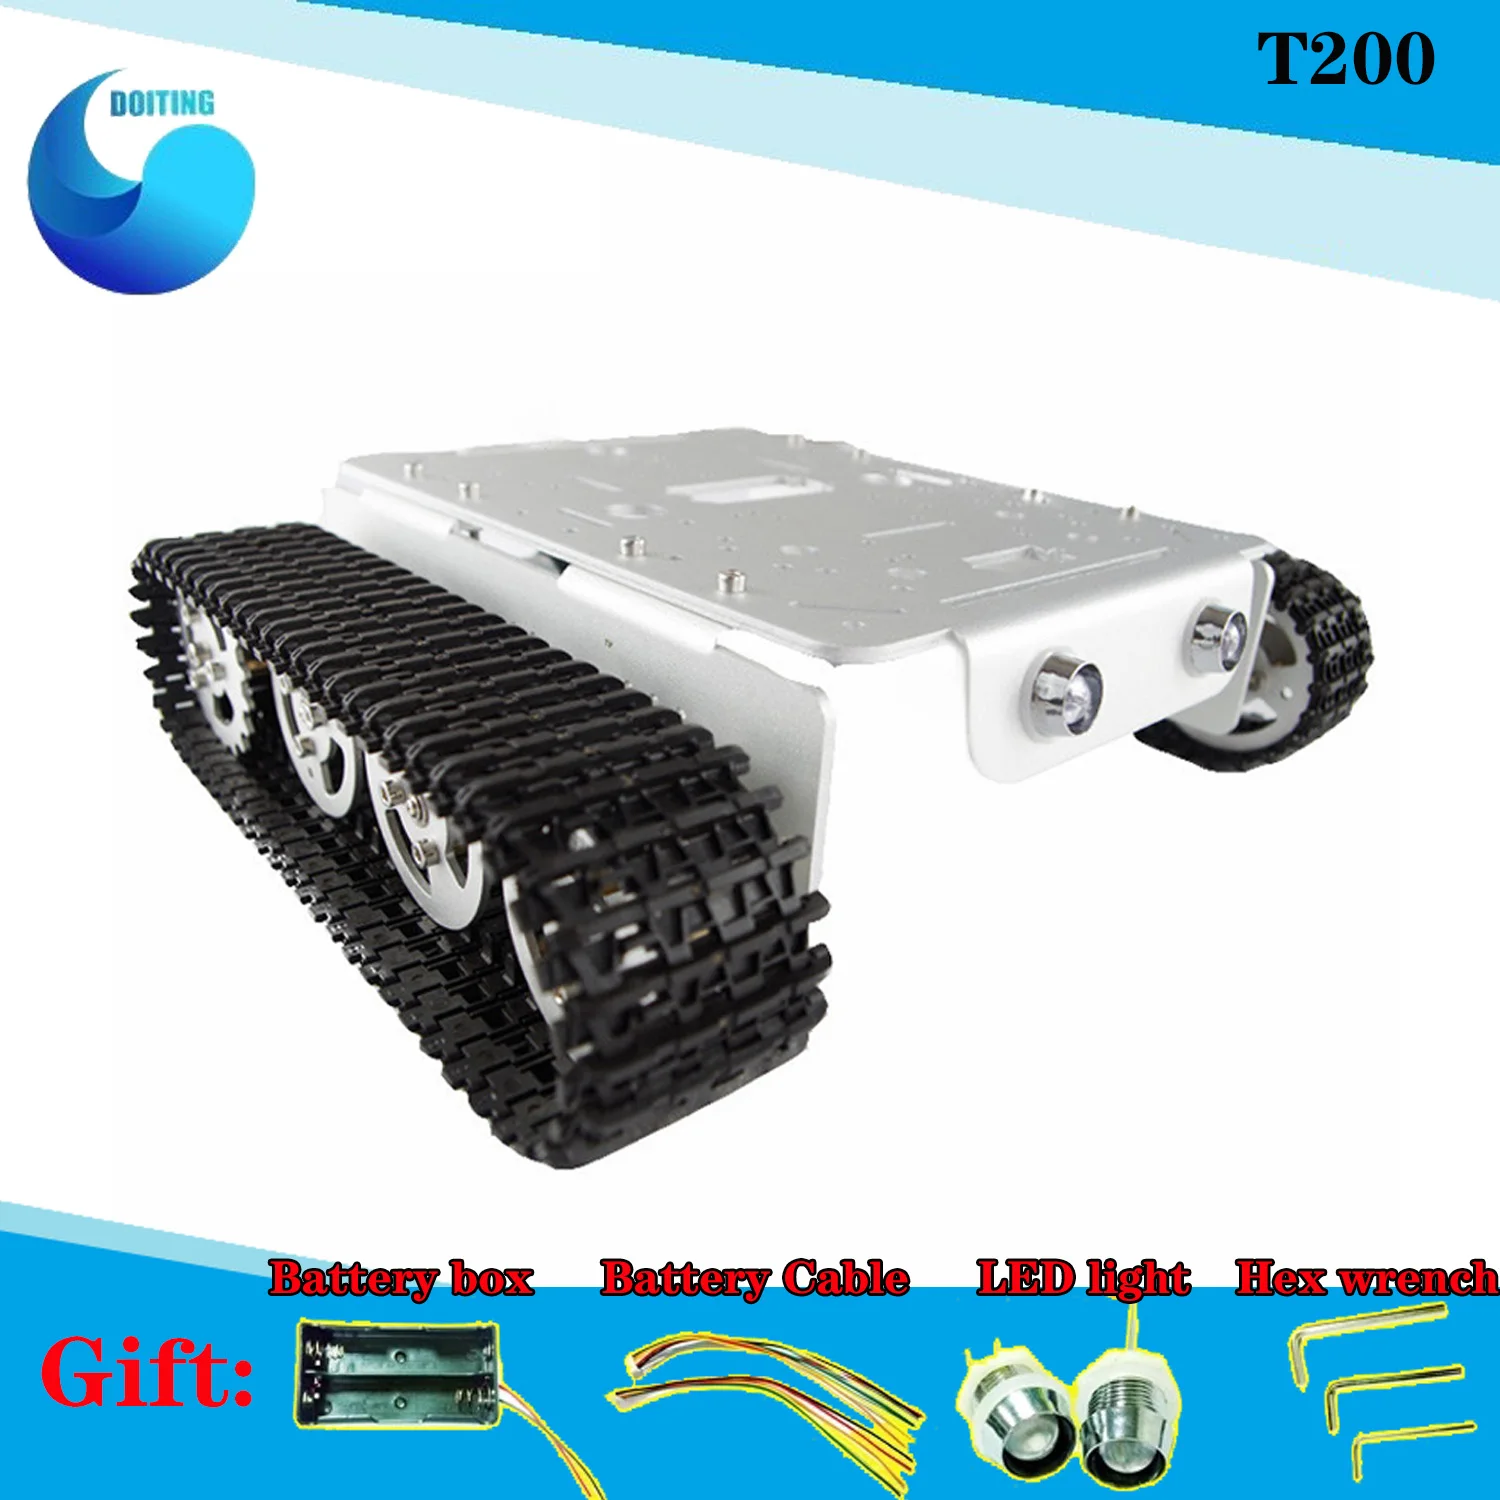 DOIT TD200 Metal Tank Chassis Robot Model Intelligent Car with Solid Structure 2 Motor Plastic Tracks Electronic Contest